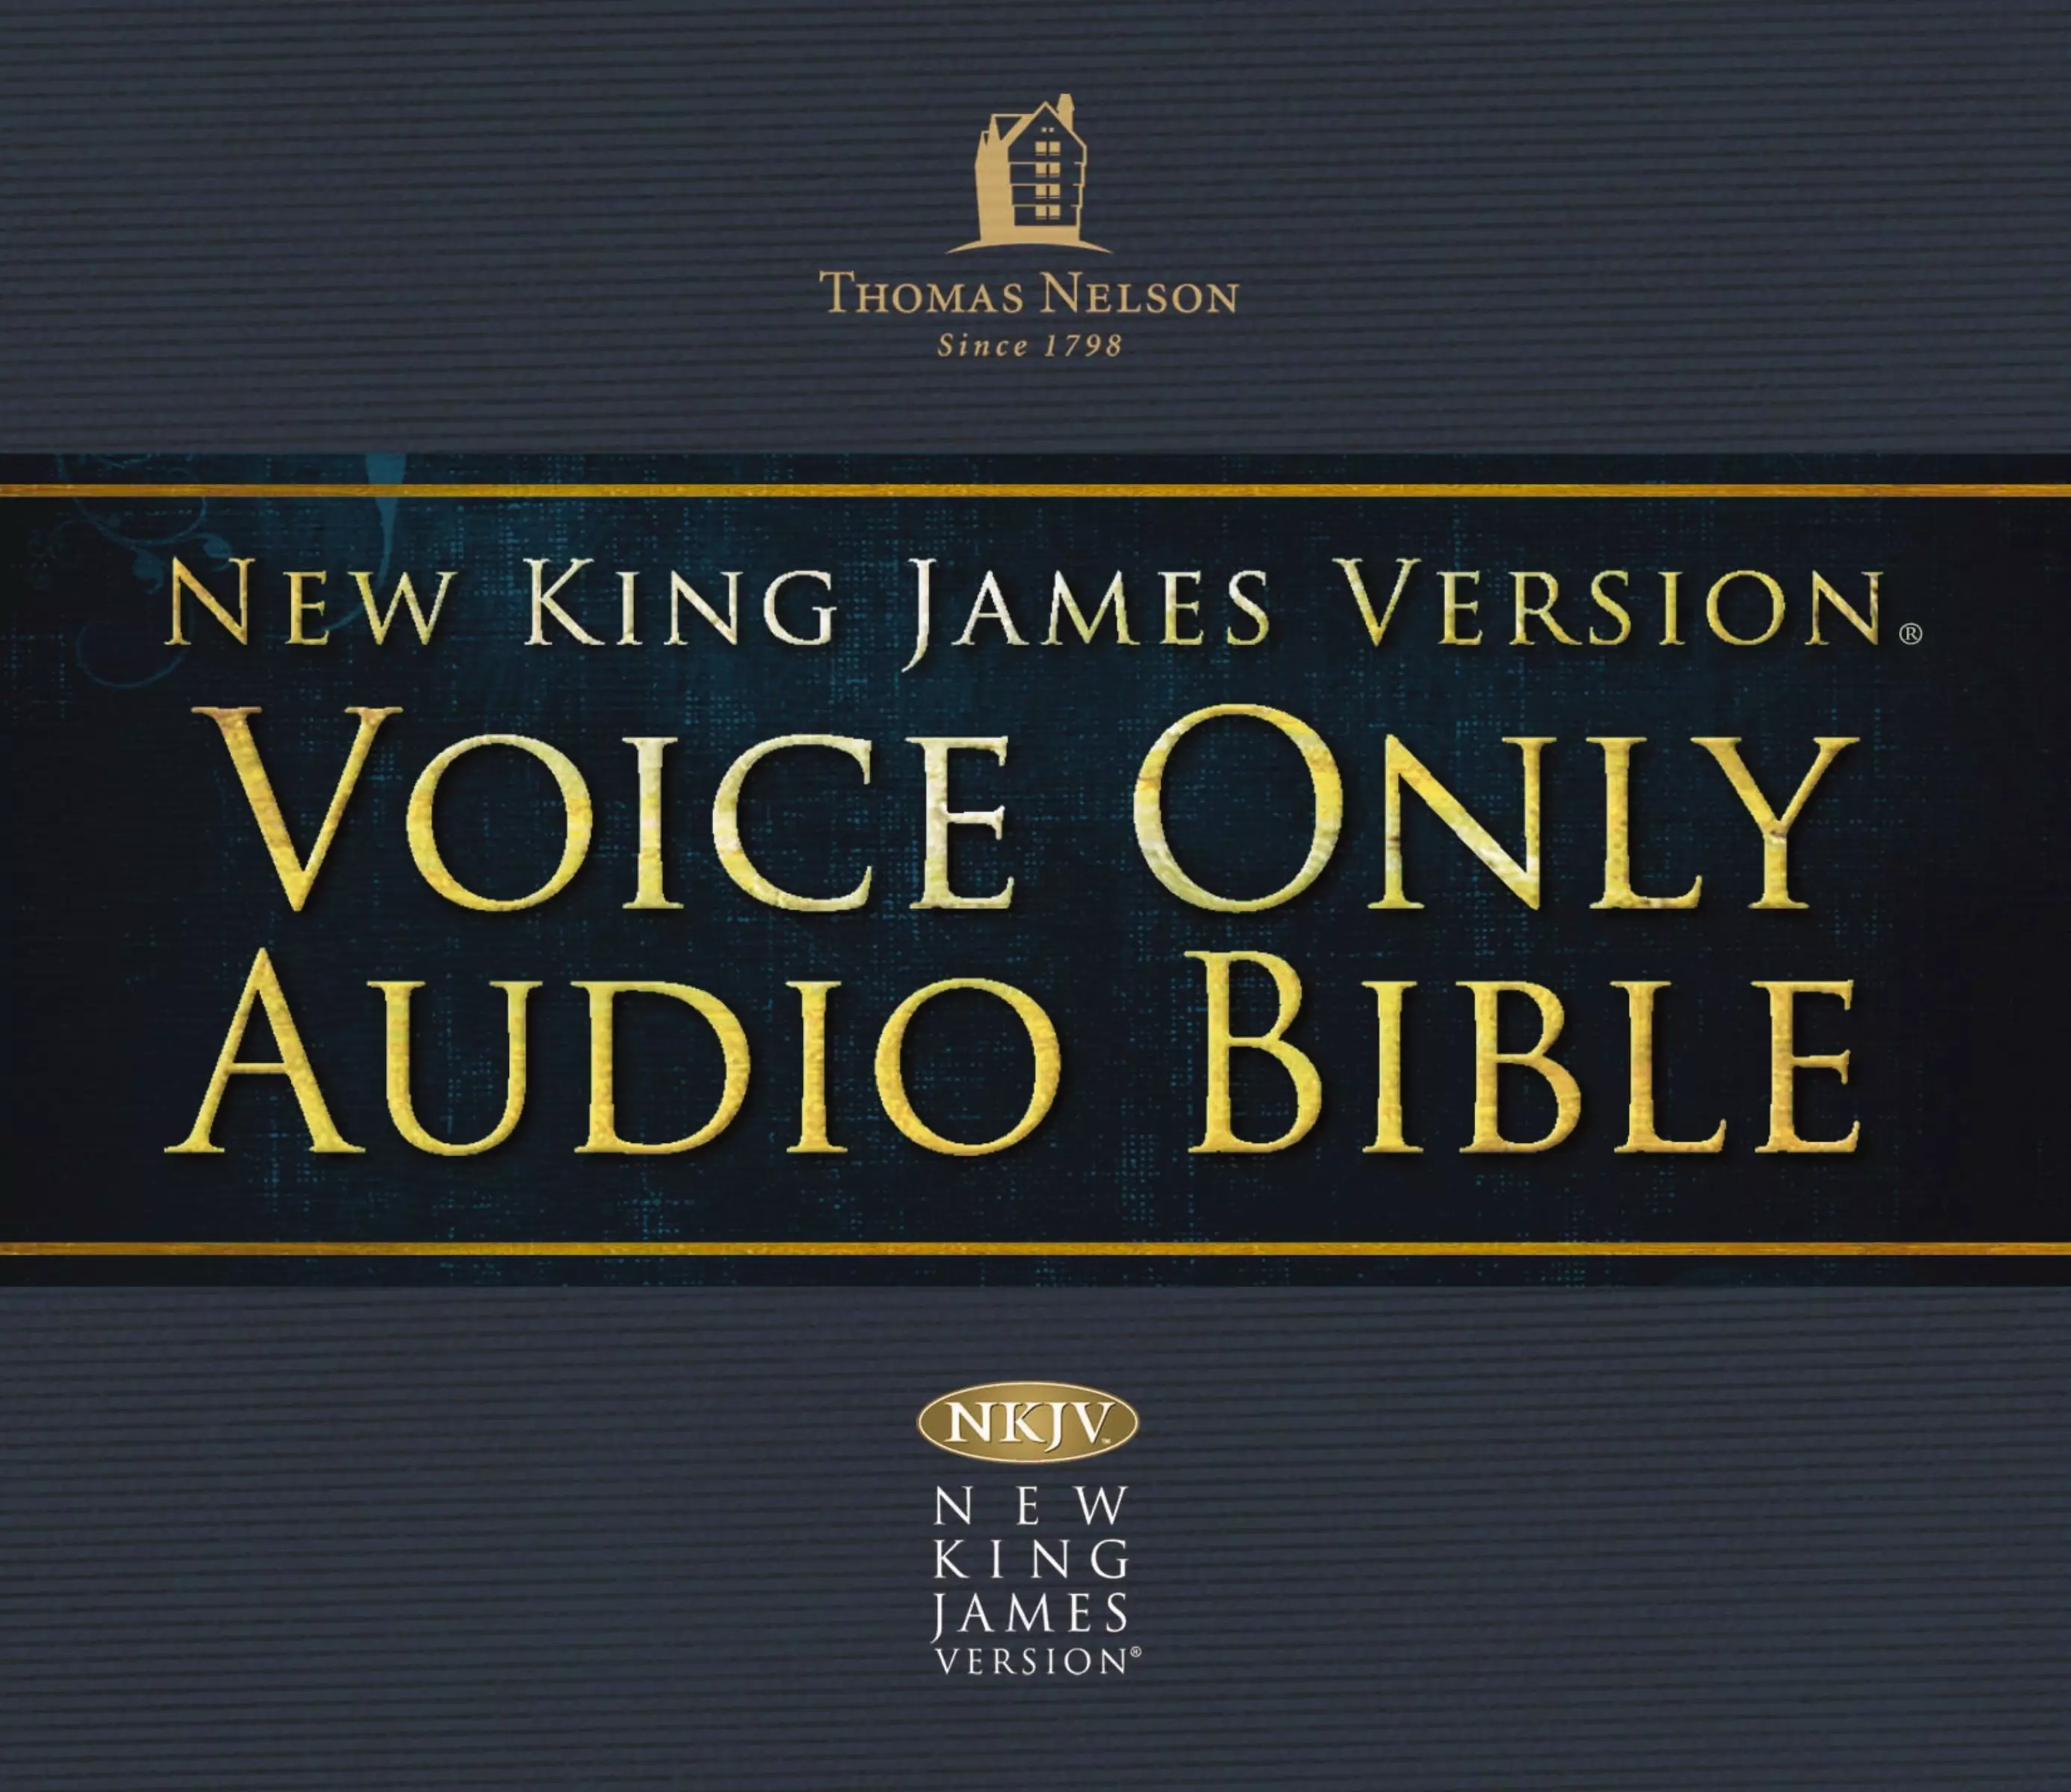 Voice Only Audio Bible - New King James Version, NKJV (Narrated by Bob Souer): (11) 2 Kings